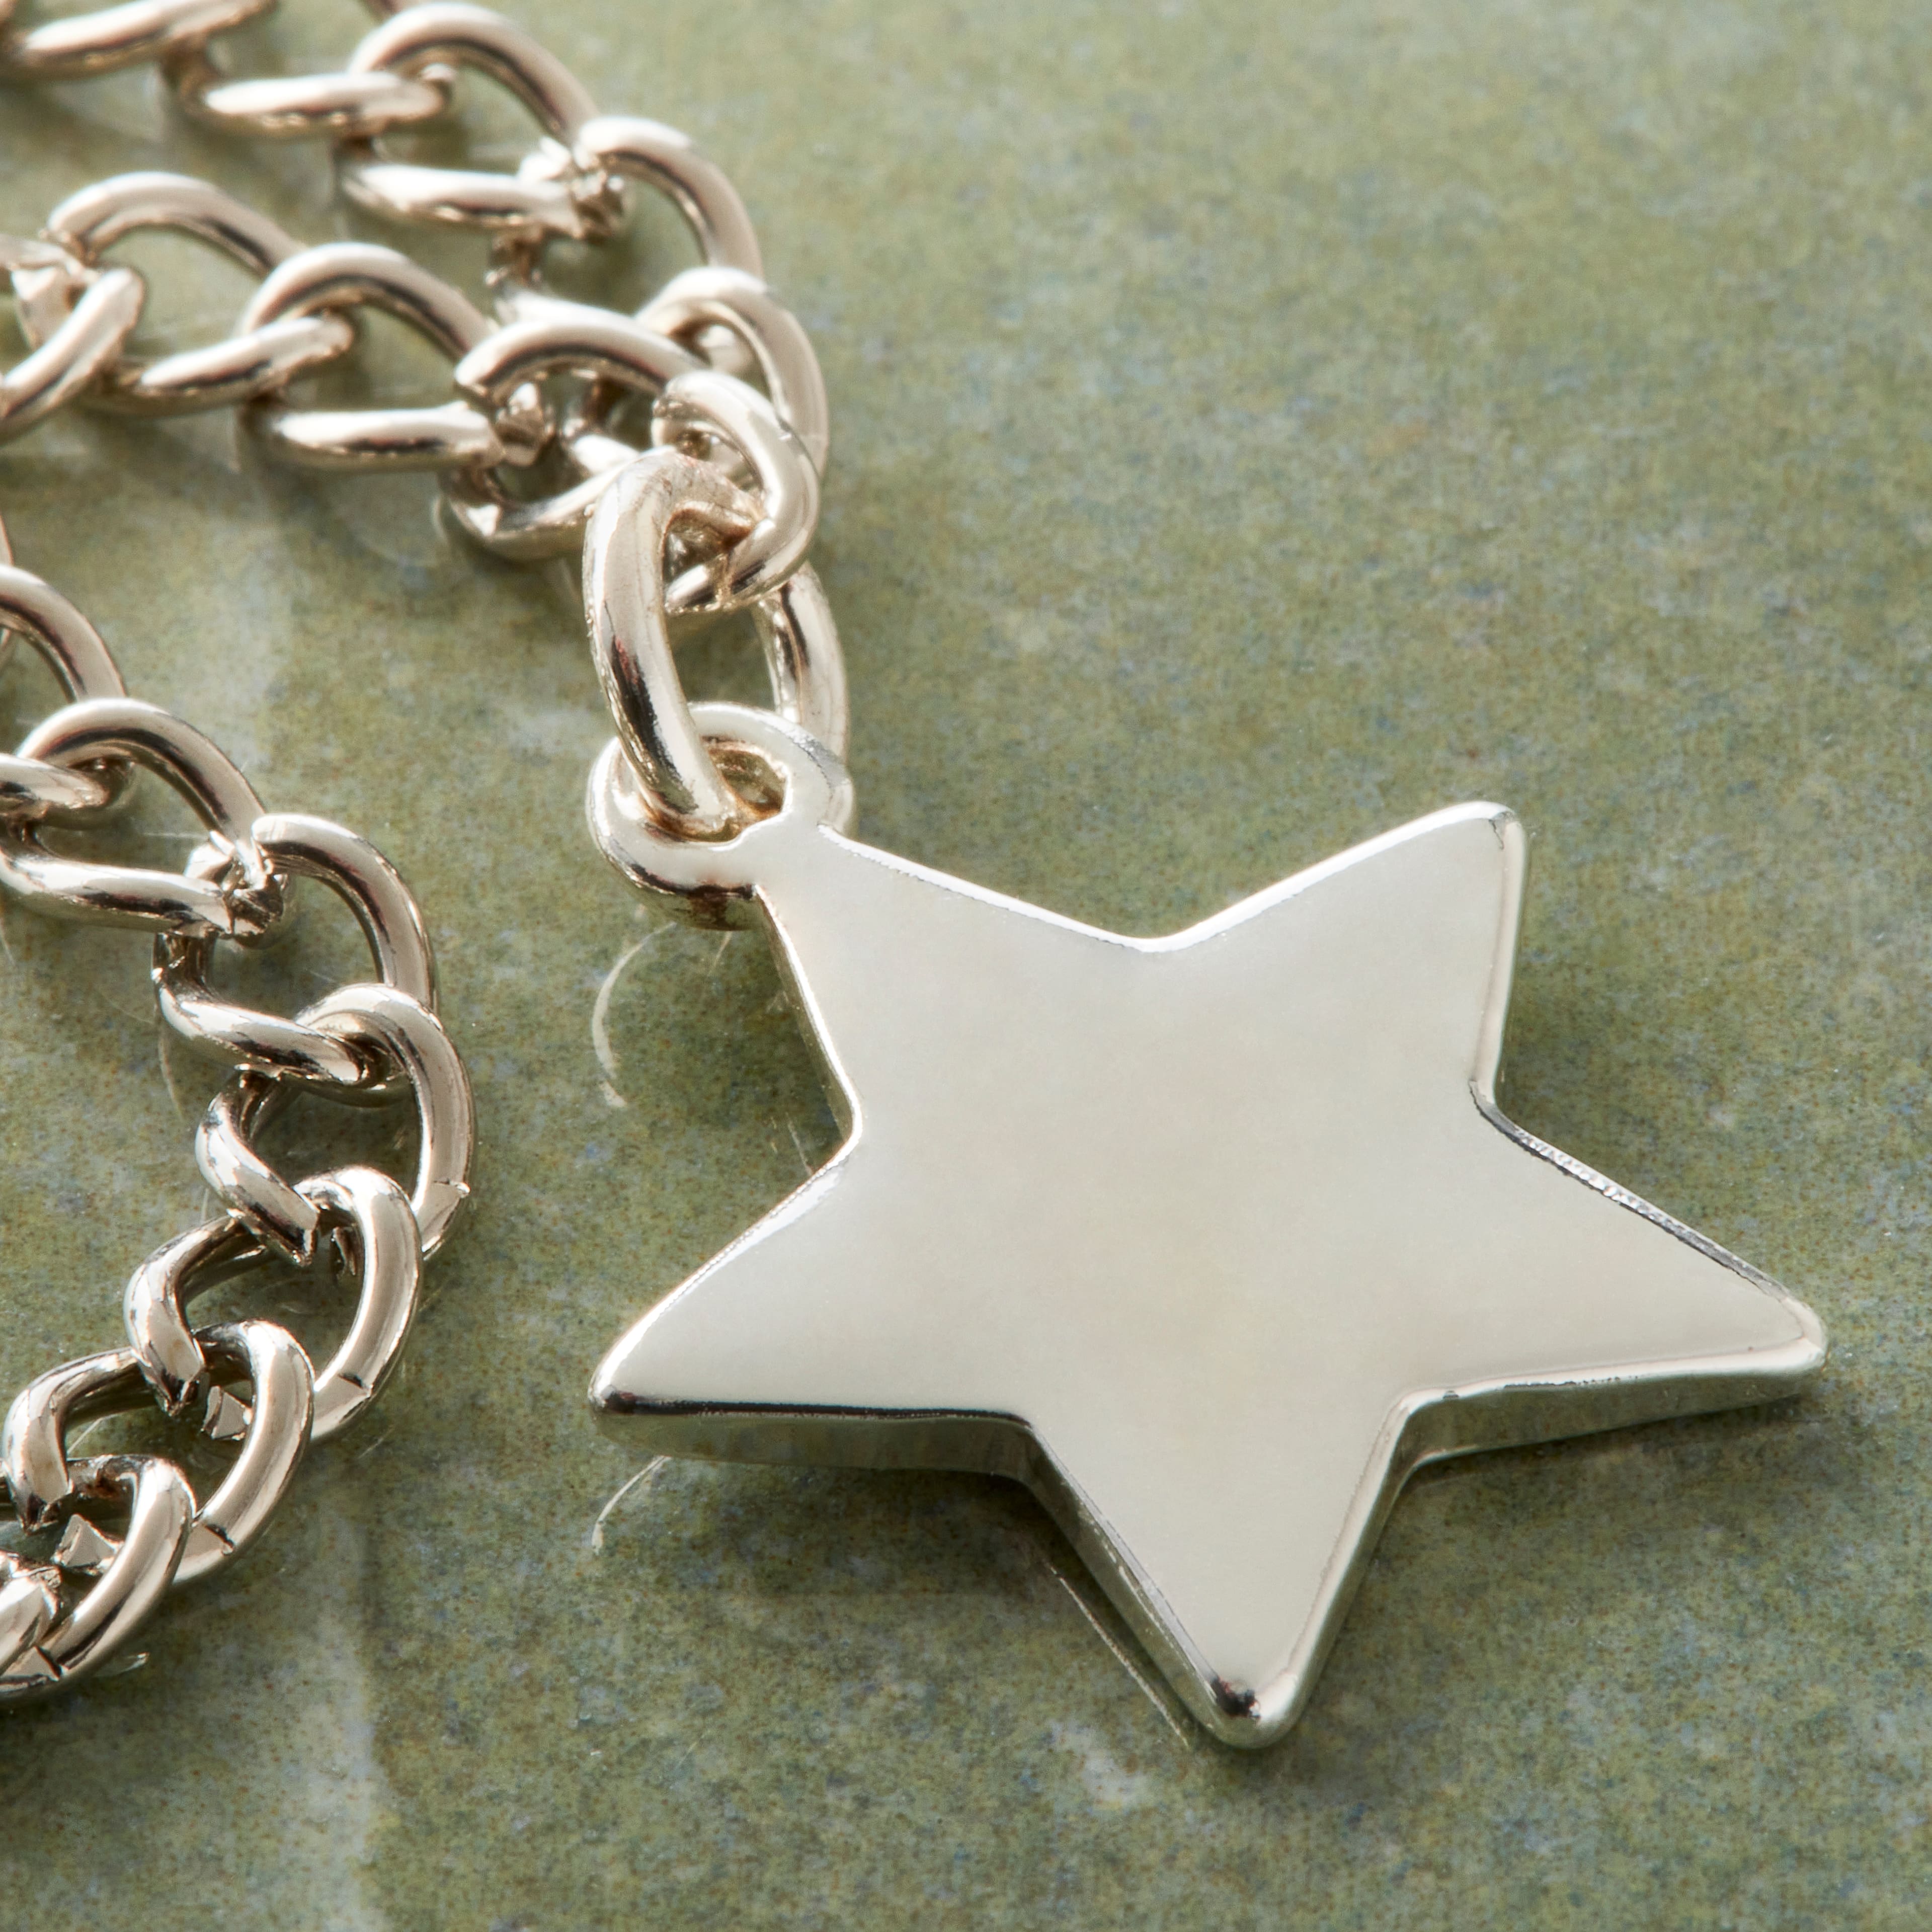 Charmalong&#x2122; Silver Plated Star Charm by Bead Landing&#x2122;